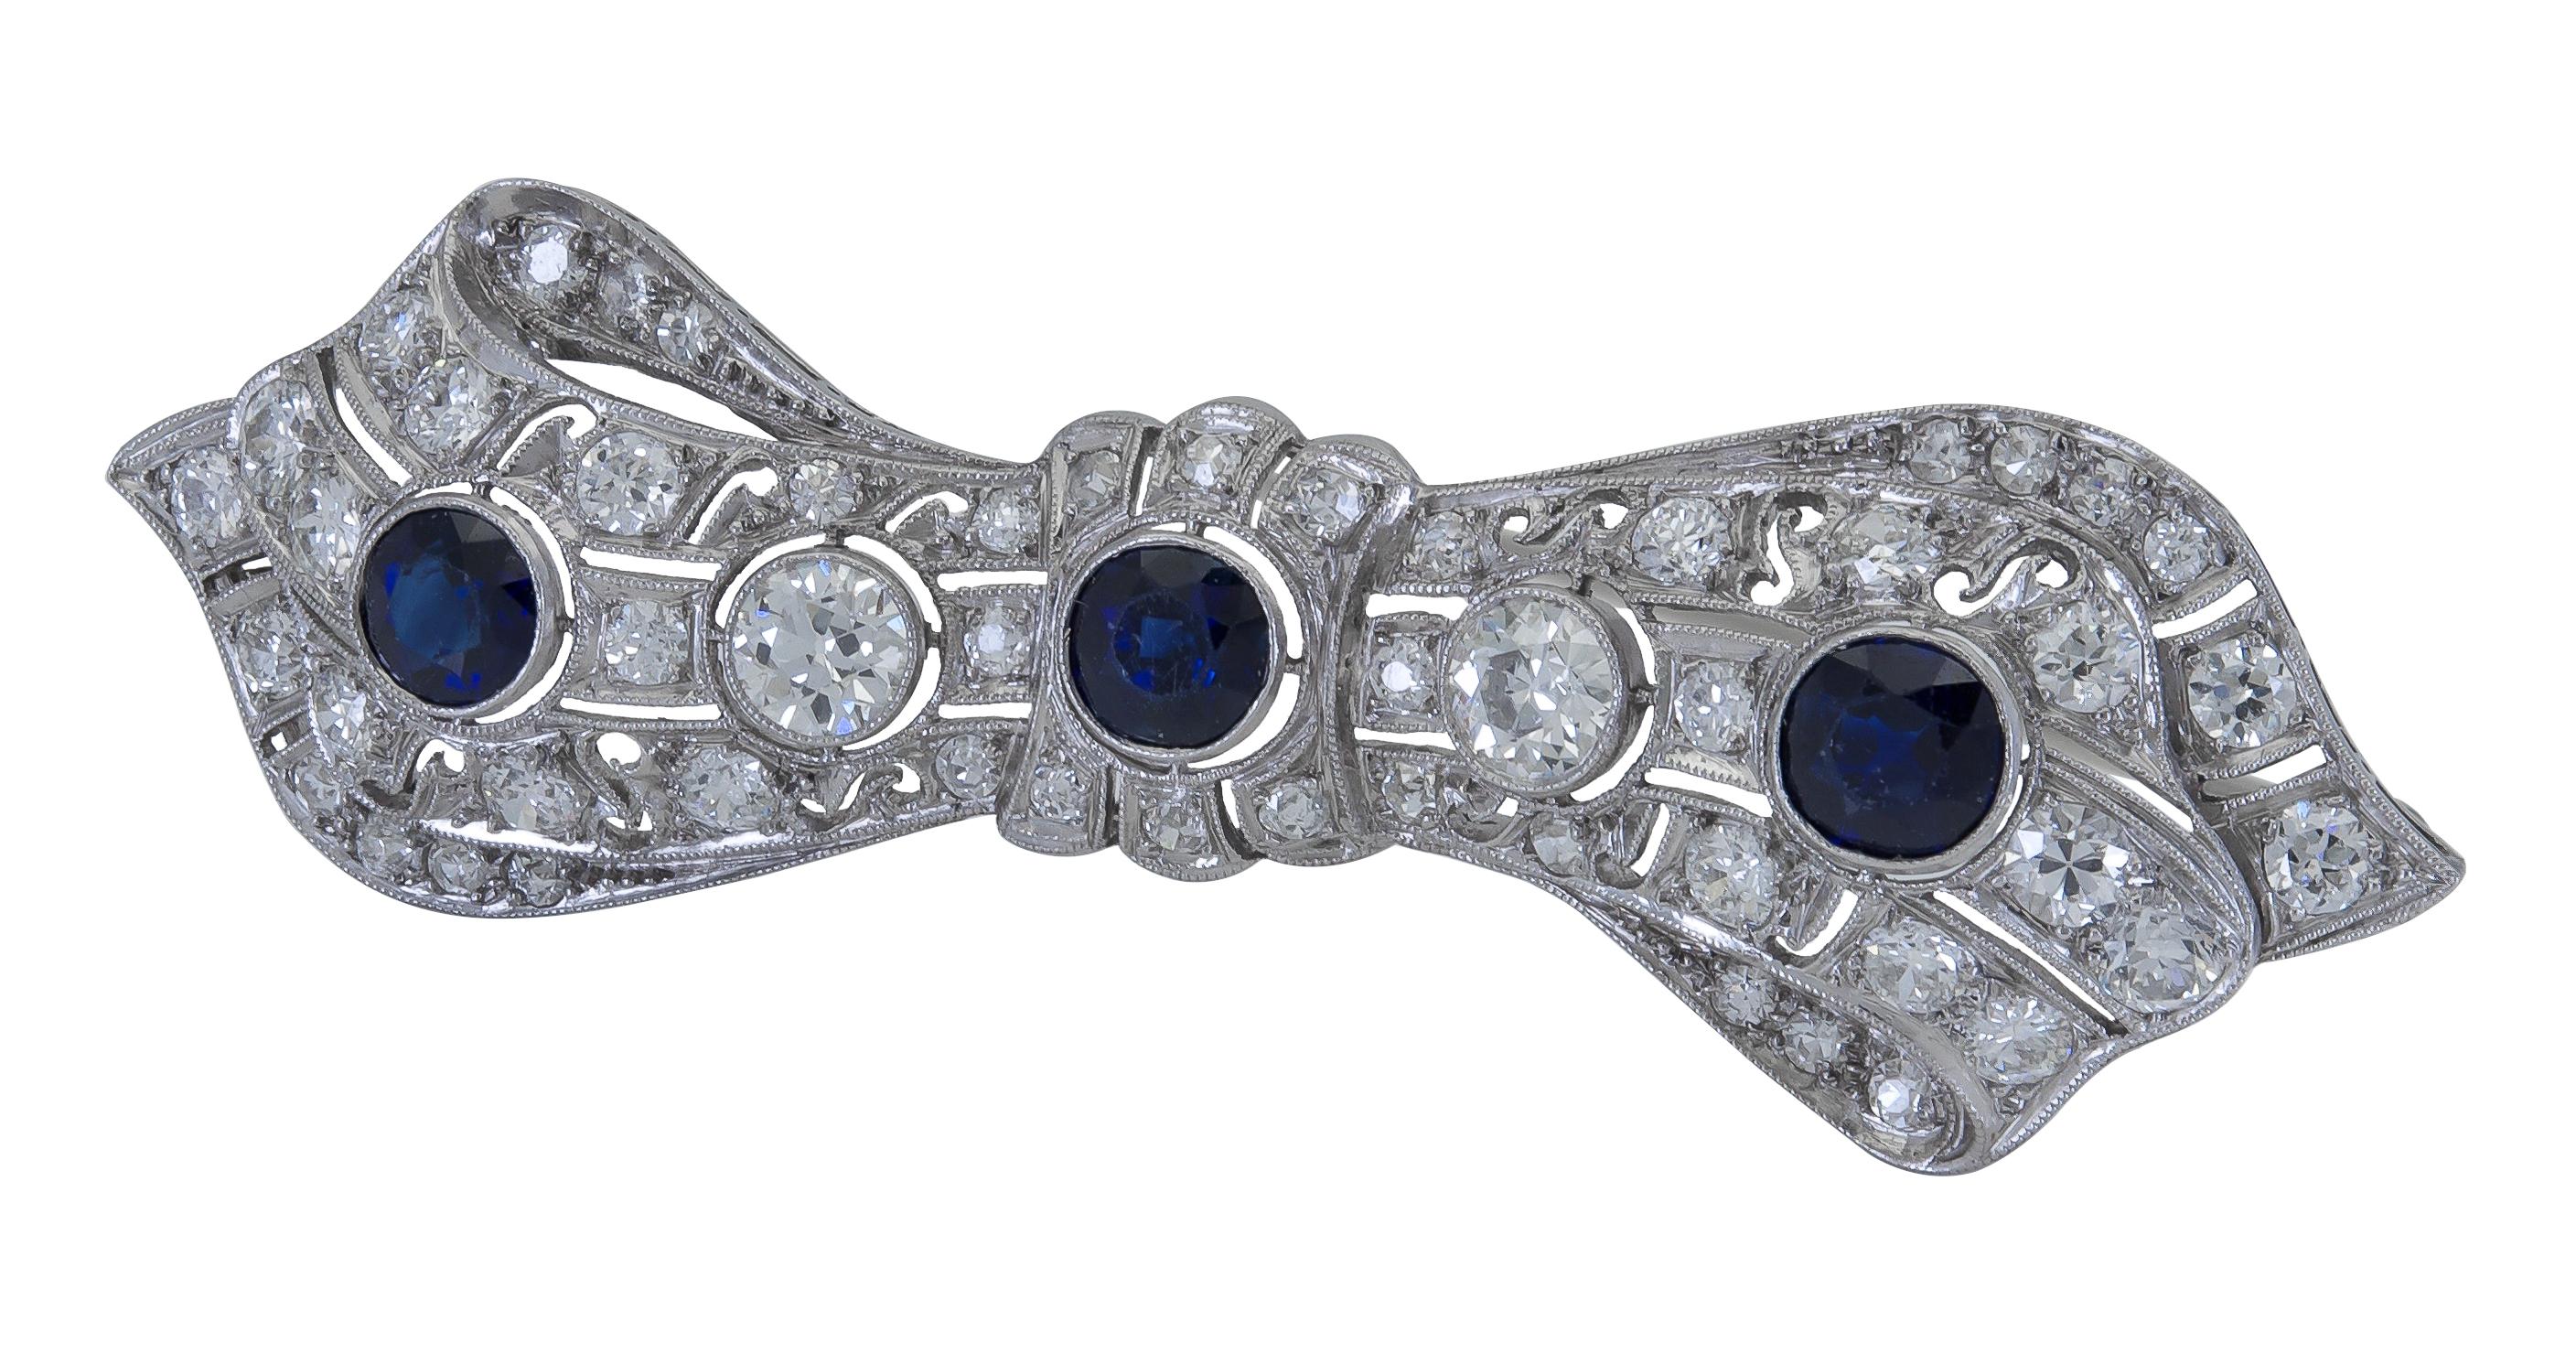 A beautiful and antique brooch showcasing a combination of blue sapphires and brilliant round diamonds set in an art deco panel design.
Dimensions: 2.00 cm (L) x 6.70cm (W)
